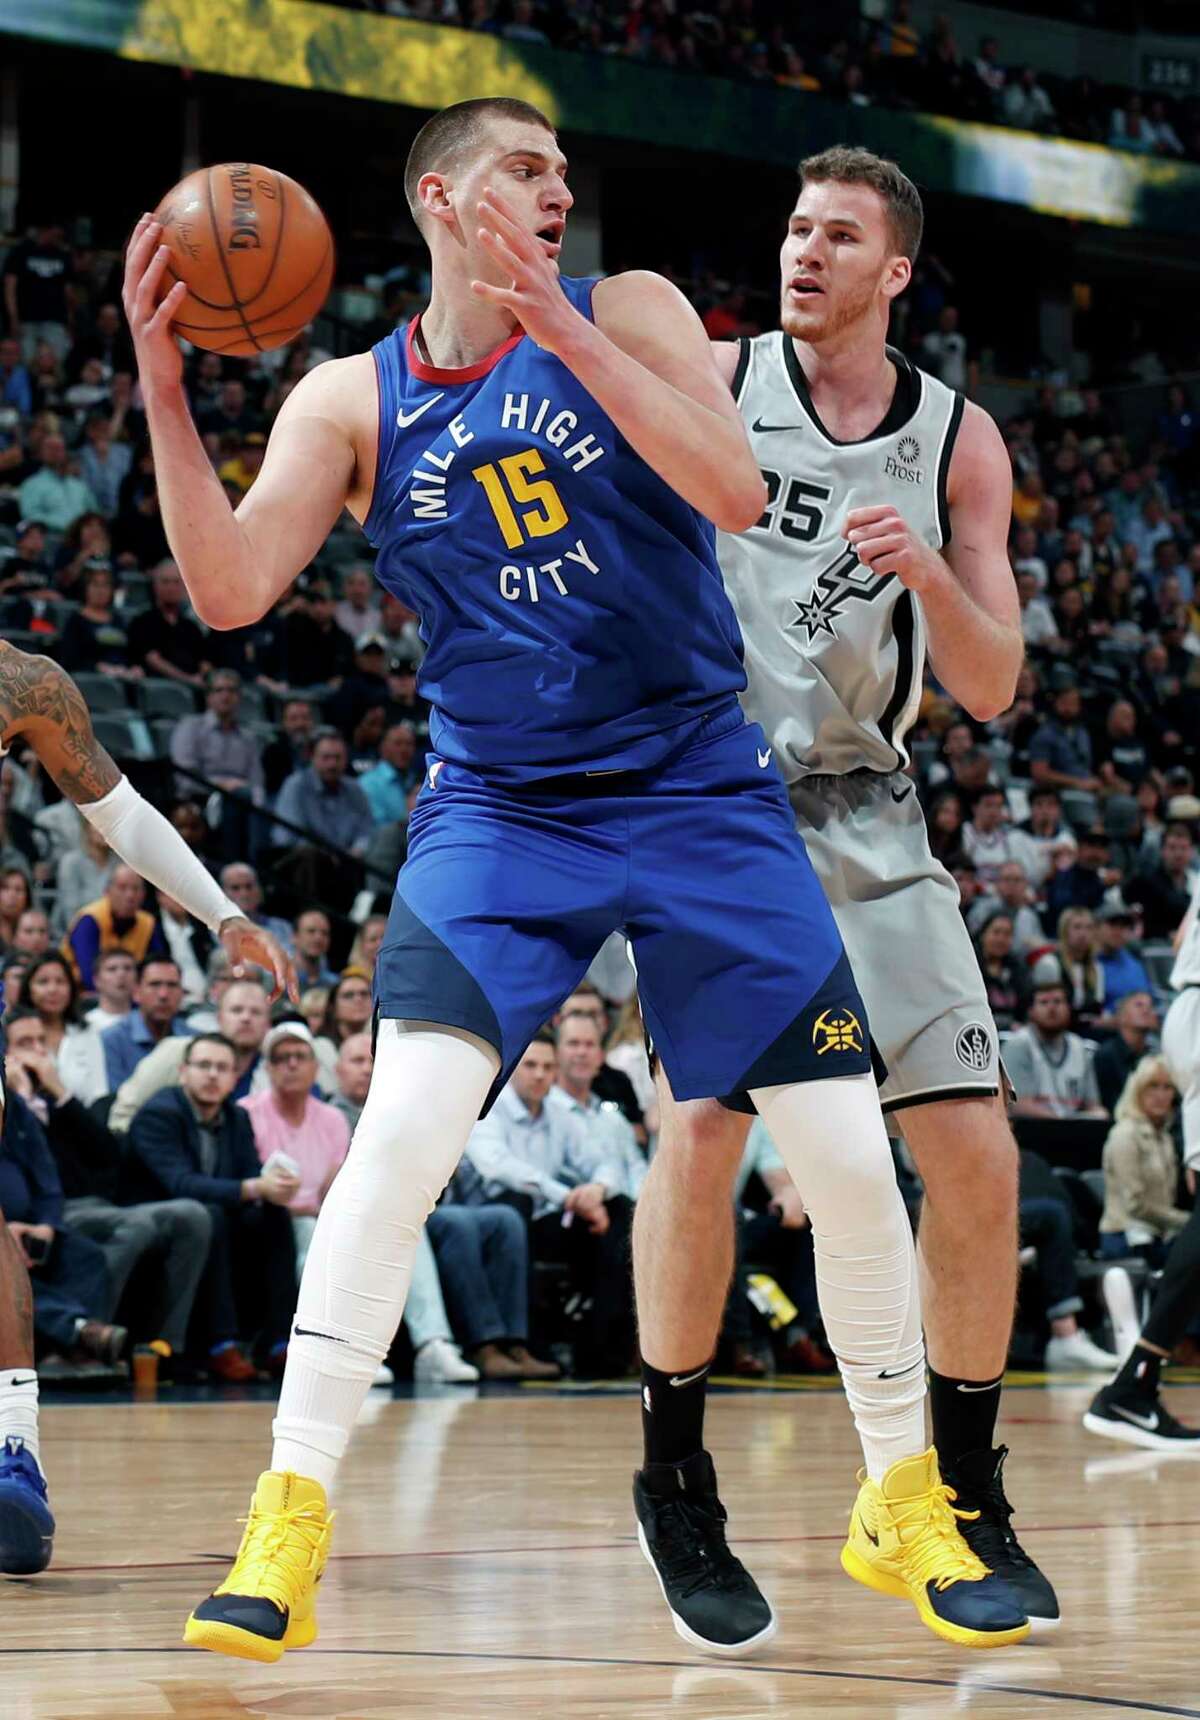 Denver Nuggets center Nikola Jokic (15) is pressured by San Antonio Spurs center Jakob Poeltl (25) in the first half of Game 5 of an NBA basketball first-round playoff series Tuesday, April 23, 2019, in Denver. (AP Photo/David Zalubowski)